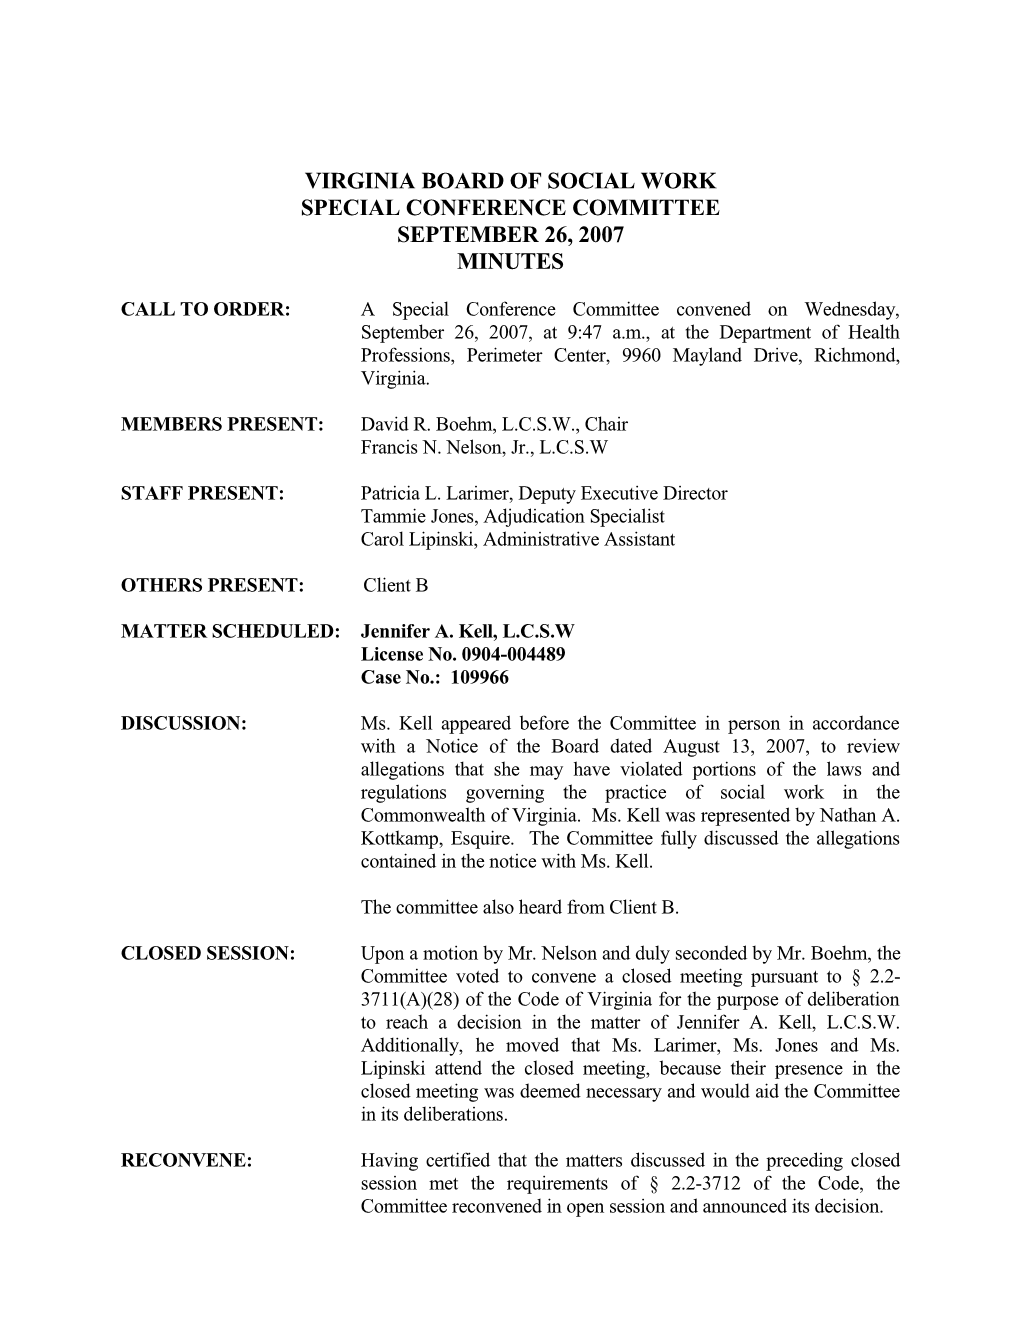 Social Work - Special Conference Committee Minutes - September 26, 2007